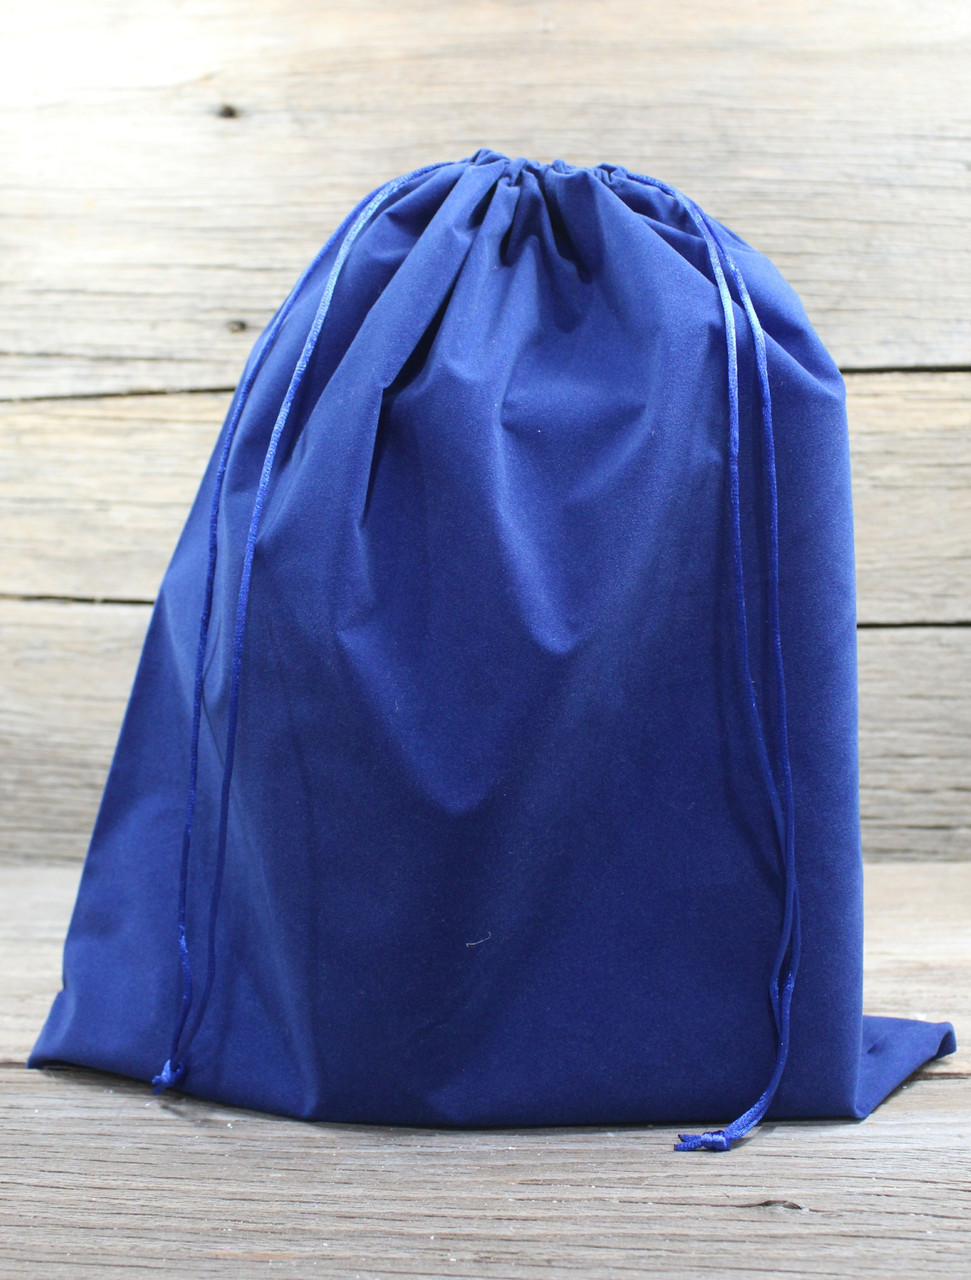 KUPOO Generic 50 Pieces Wholesale Lot - Royal Blue Velvet Cloth Jewelry Pouches / Drawstring Bags 3 x 4